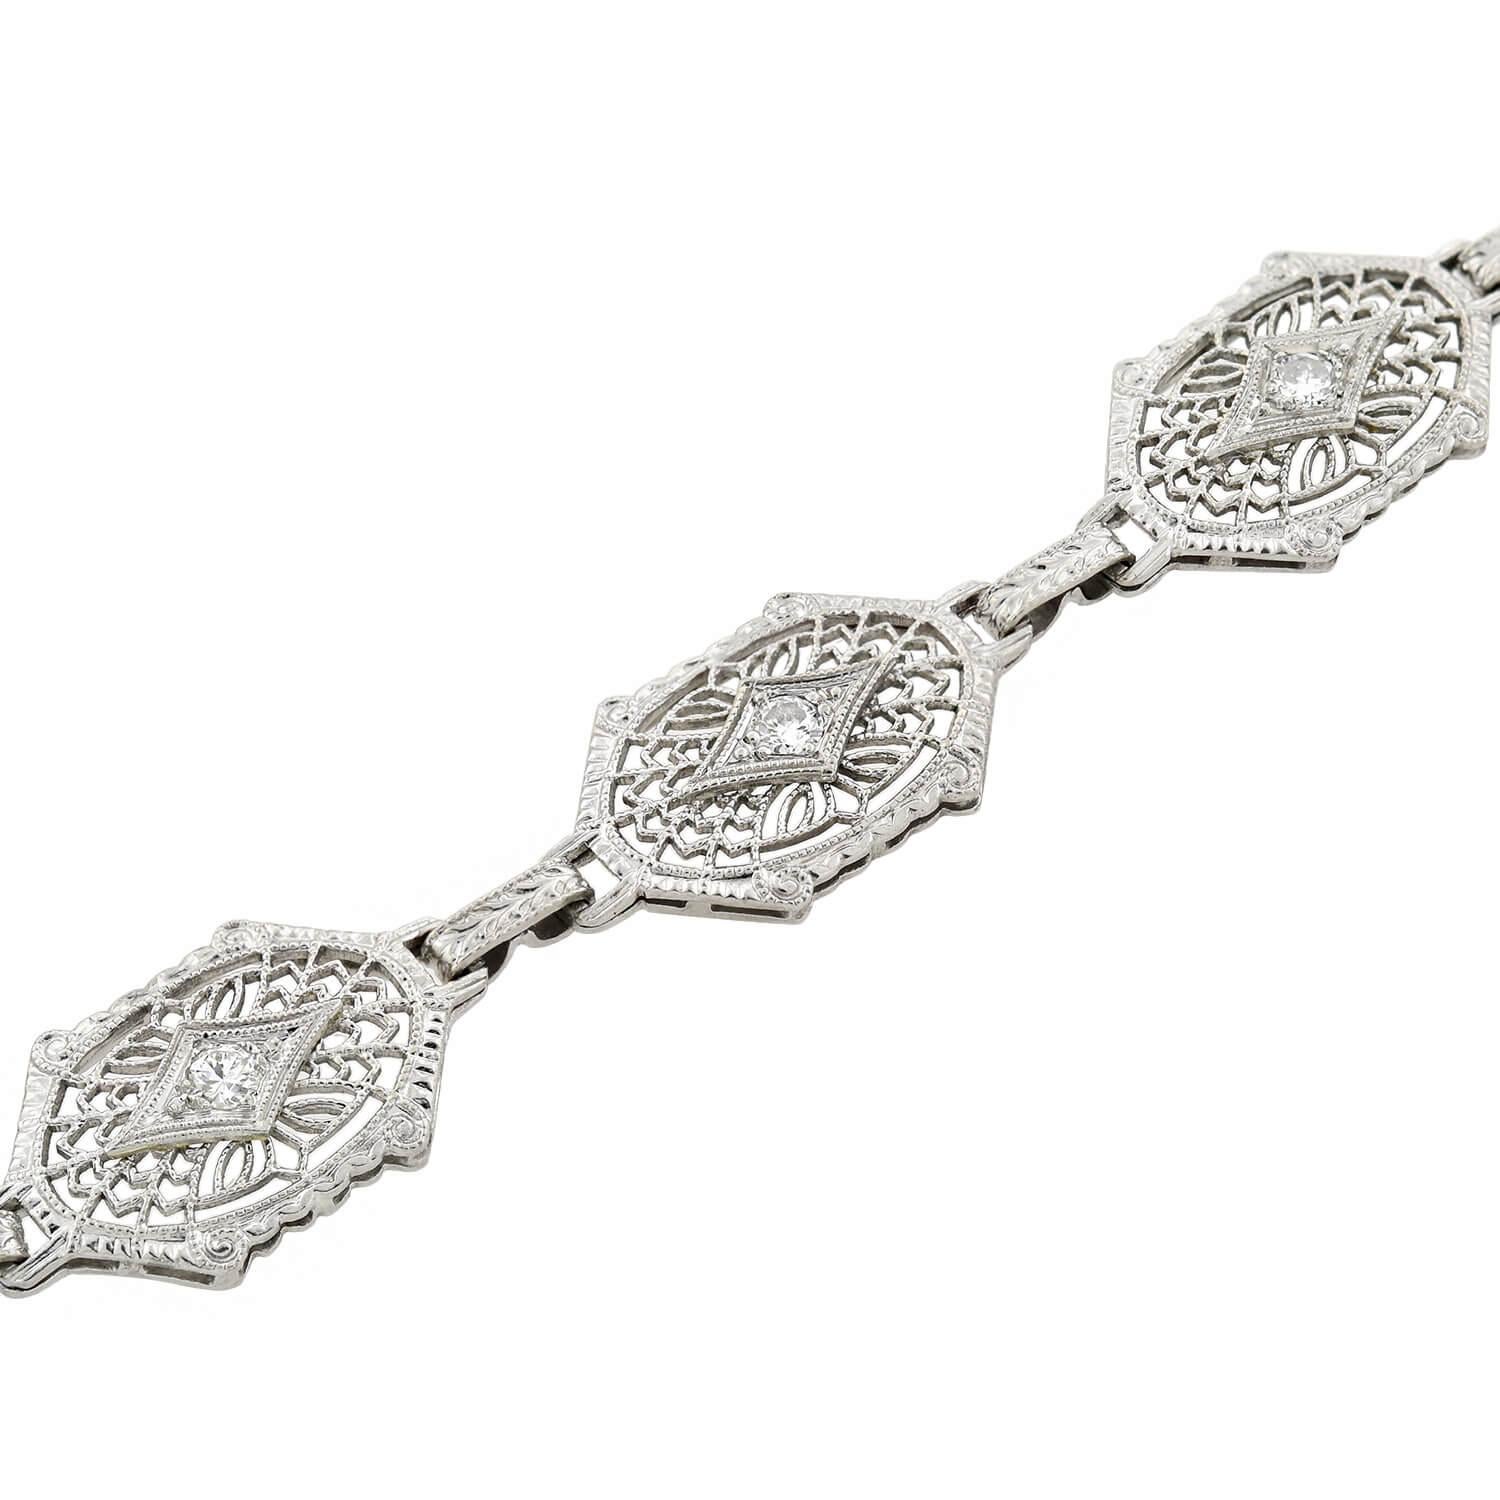 A stunning filigree bracelet from the Art Deco (ca1920s) era! Crafted in platinum topped 14kt white gold, this wonderful piece is comprised of eight detailed links that display a fine filigree wirework design. The links connect together at an